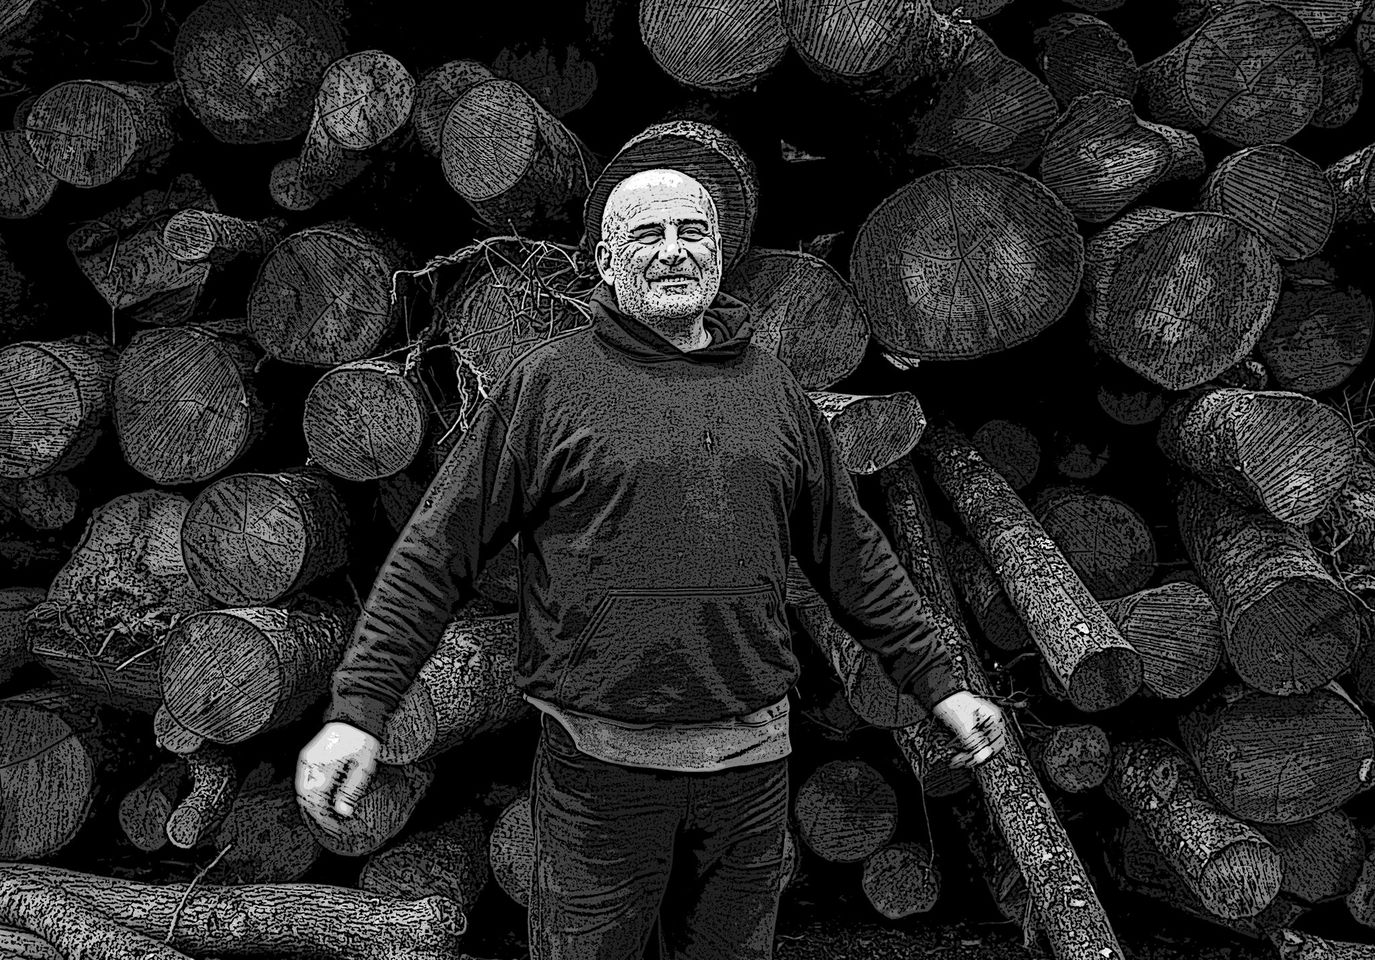 A black and white illustration of a man smiling in front of a pile of logs